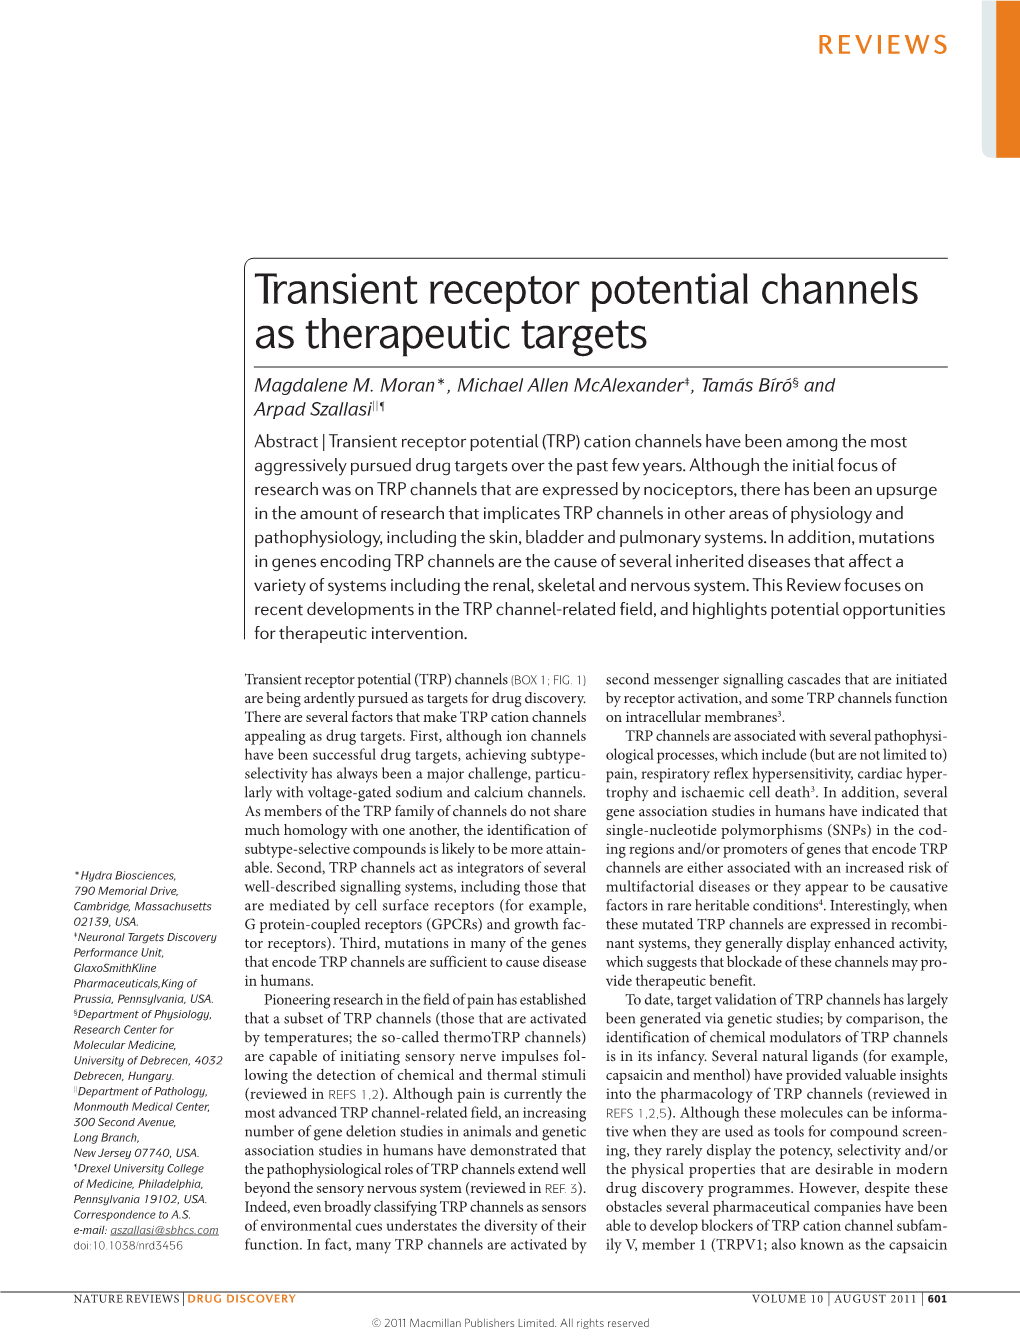 Transient Receptor Potential Channels As Therapeutic Targets